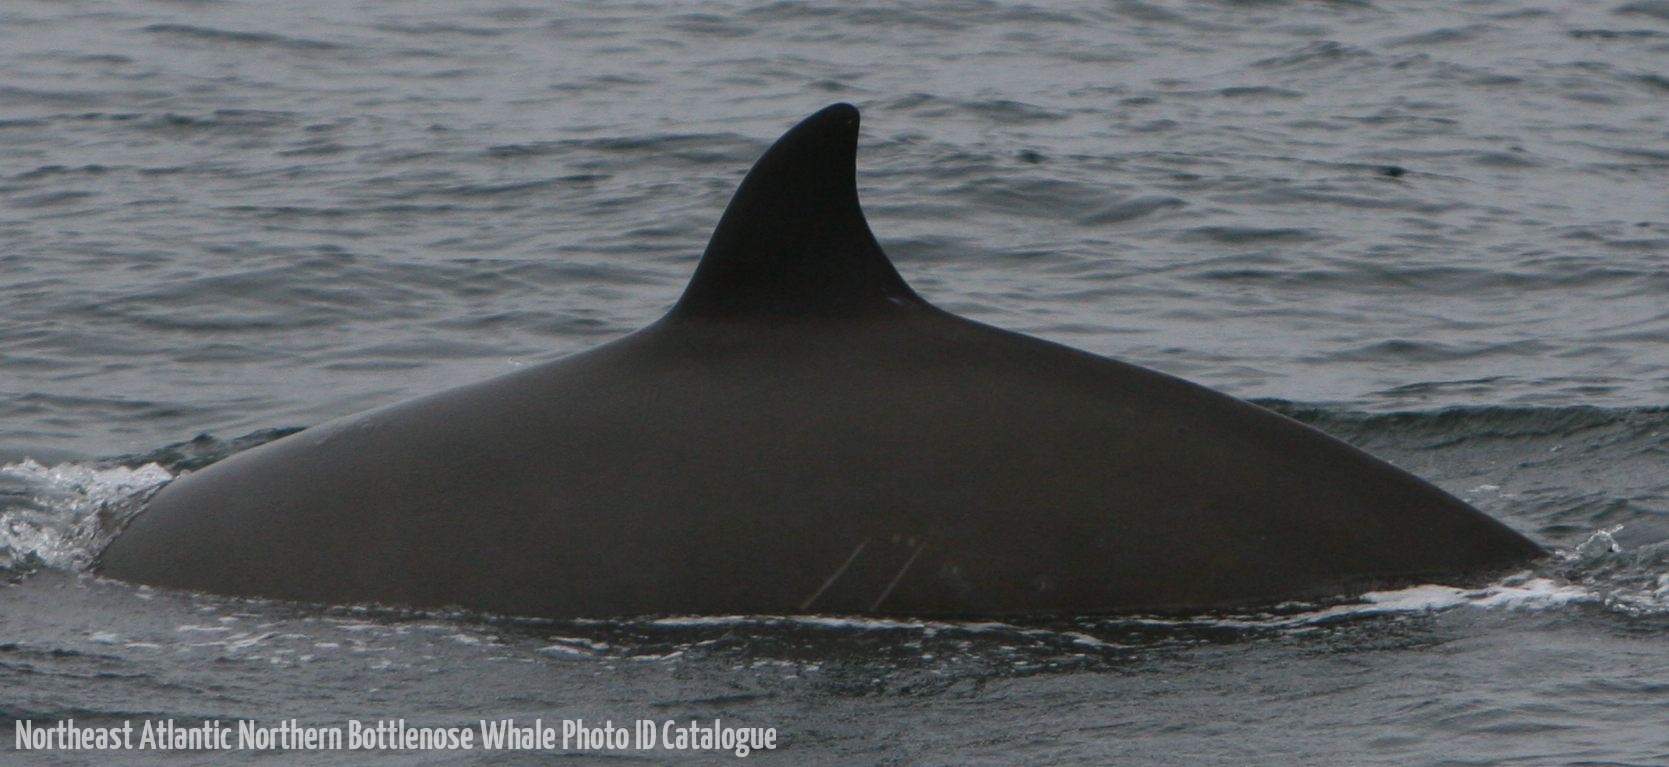 Whale ID: 0100,  Date taken: 21-06-2015,  Photographer: Unknown/project camera